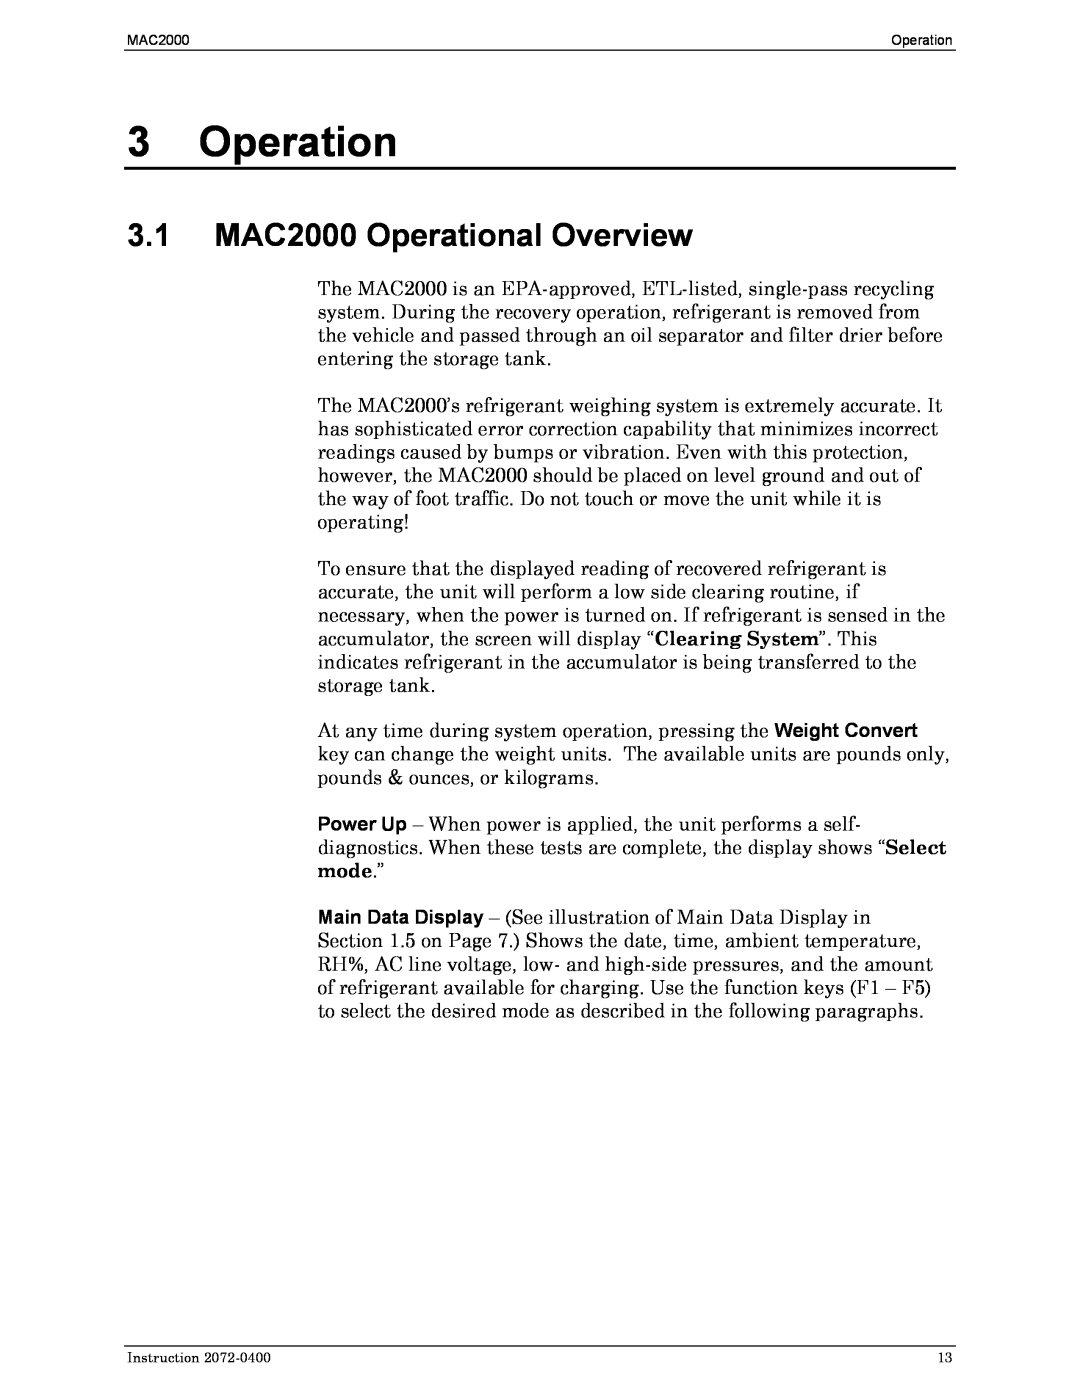 Bacharach 2072-0400 manual 3.1MAC2000 Operational Overview 